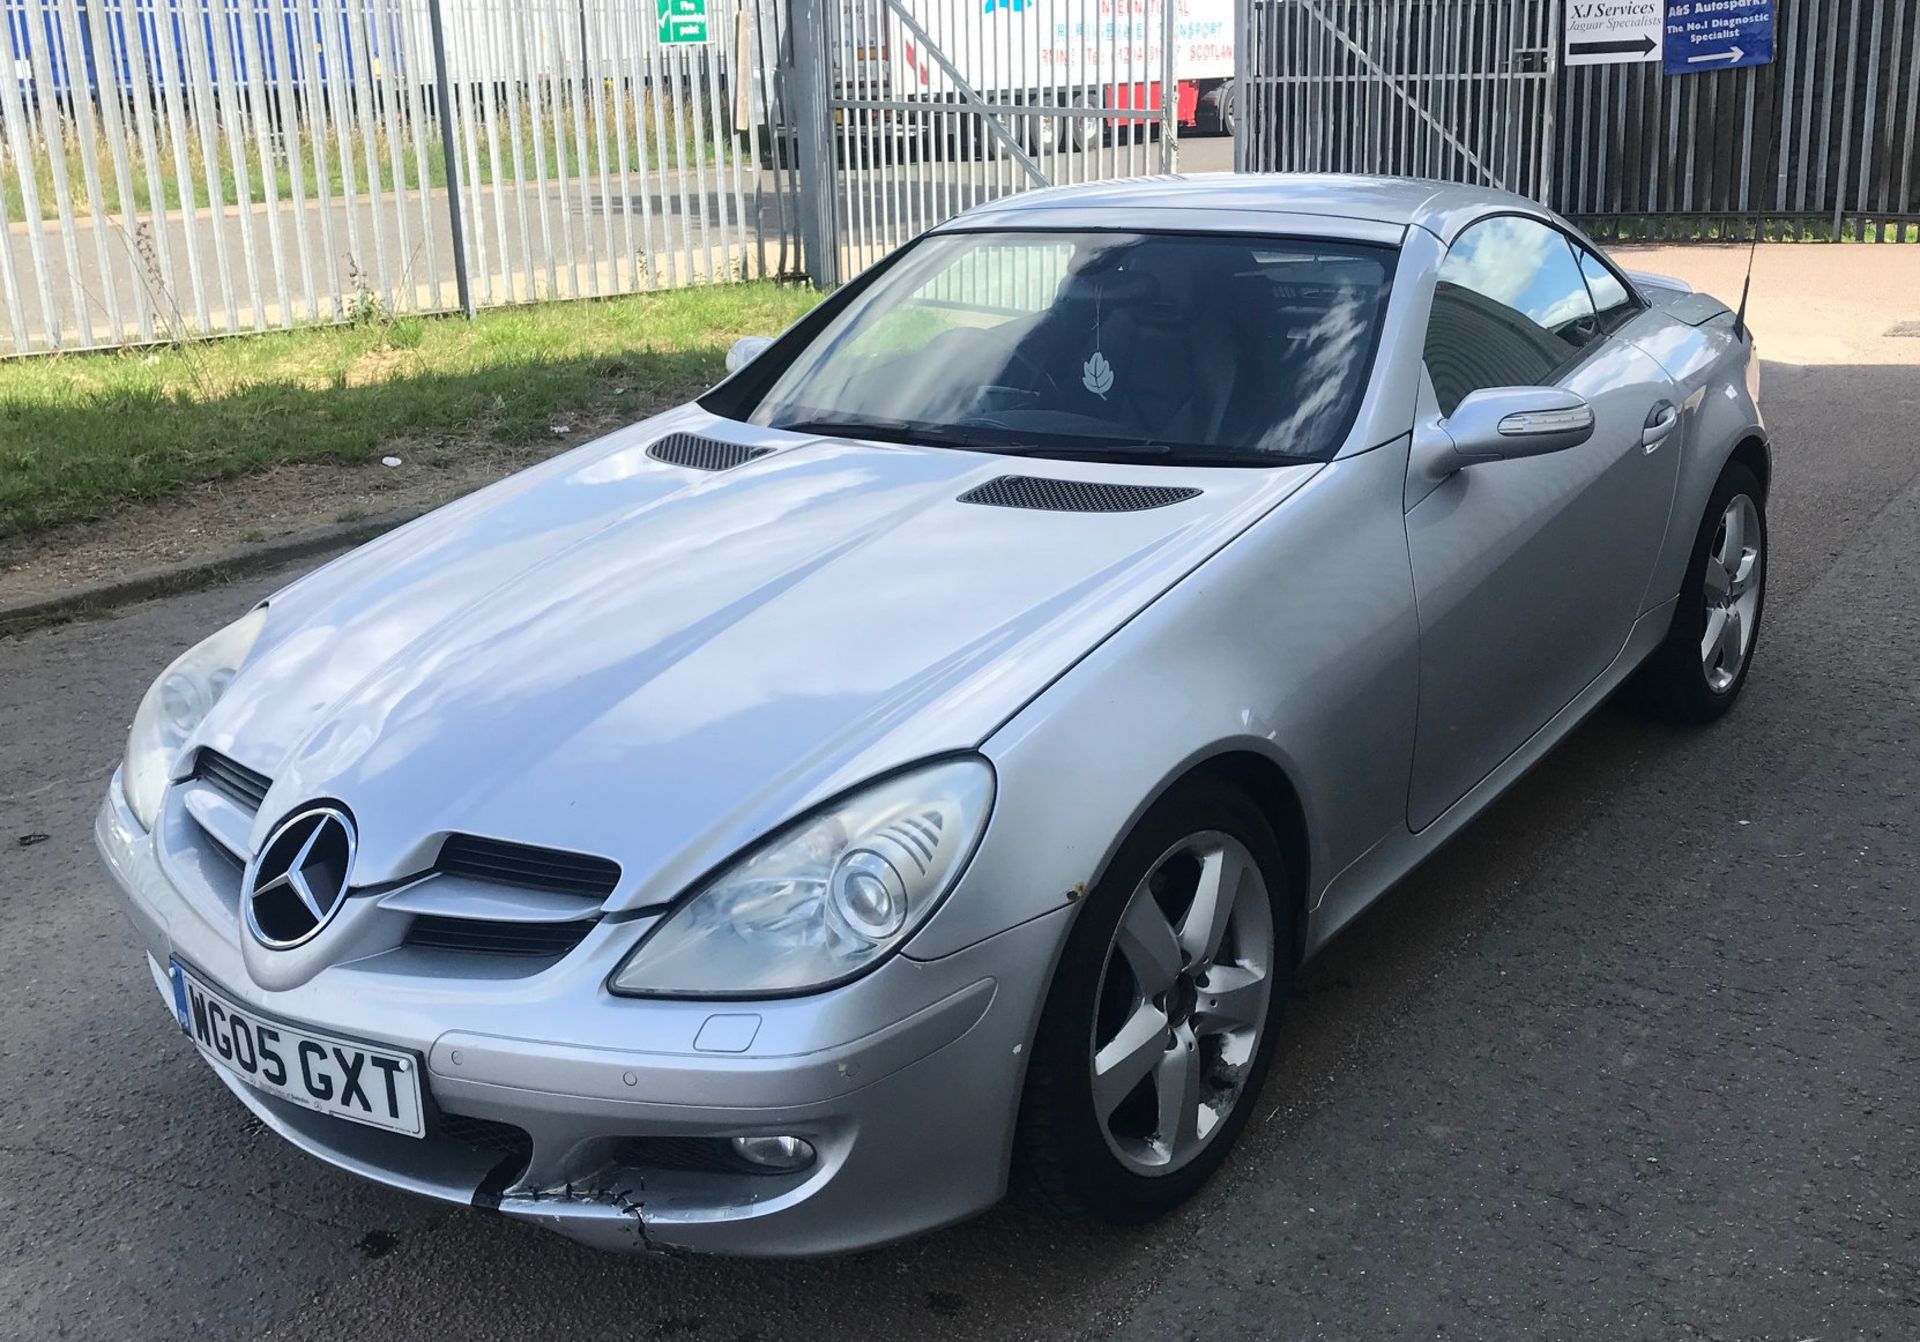 2005 Mercedes SLK 350 2 Dr Convertible - CL505 - NO VAT ON THE HAMMER - Location: Corby, N - Image 2 of 11